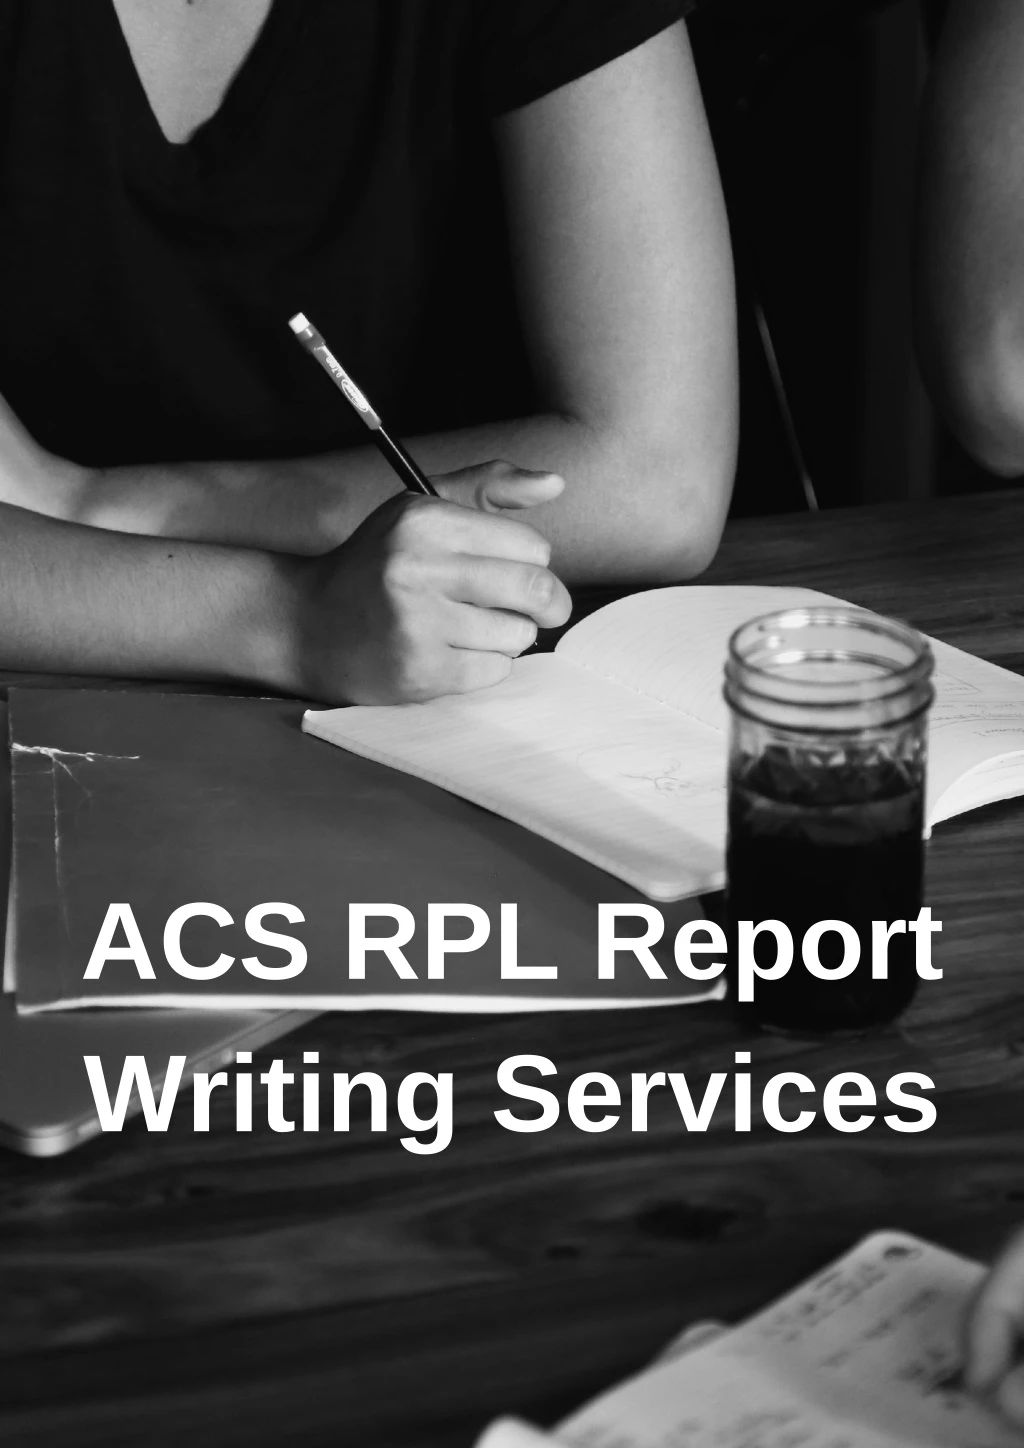 acs rpl report writing services